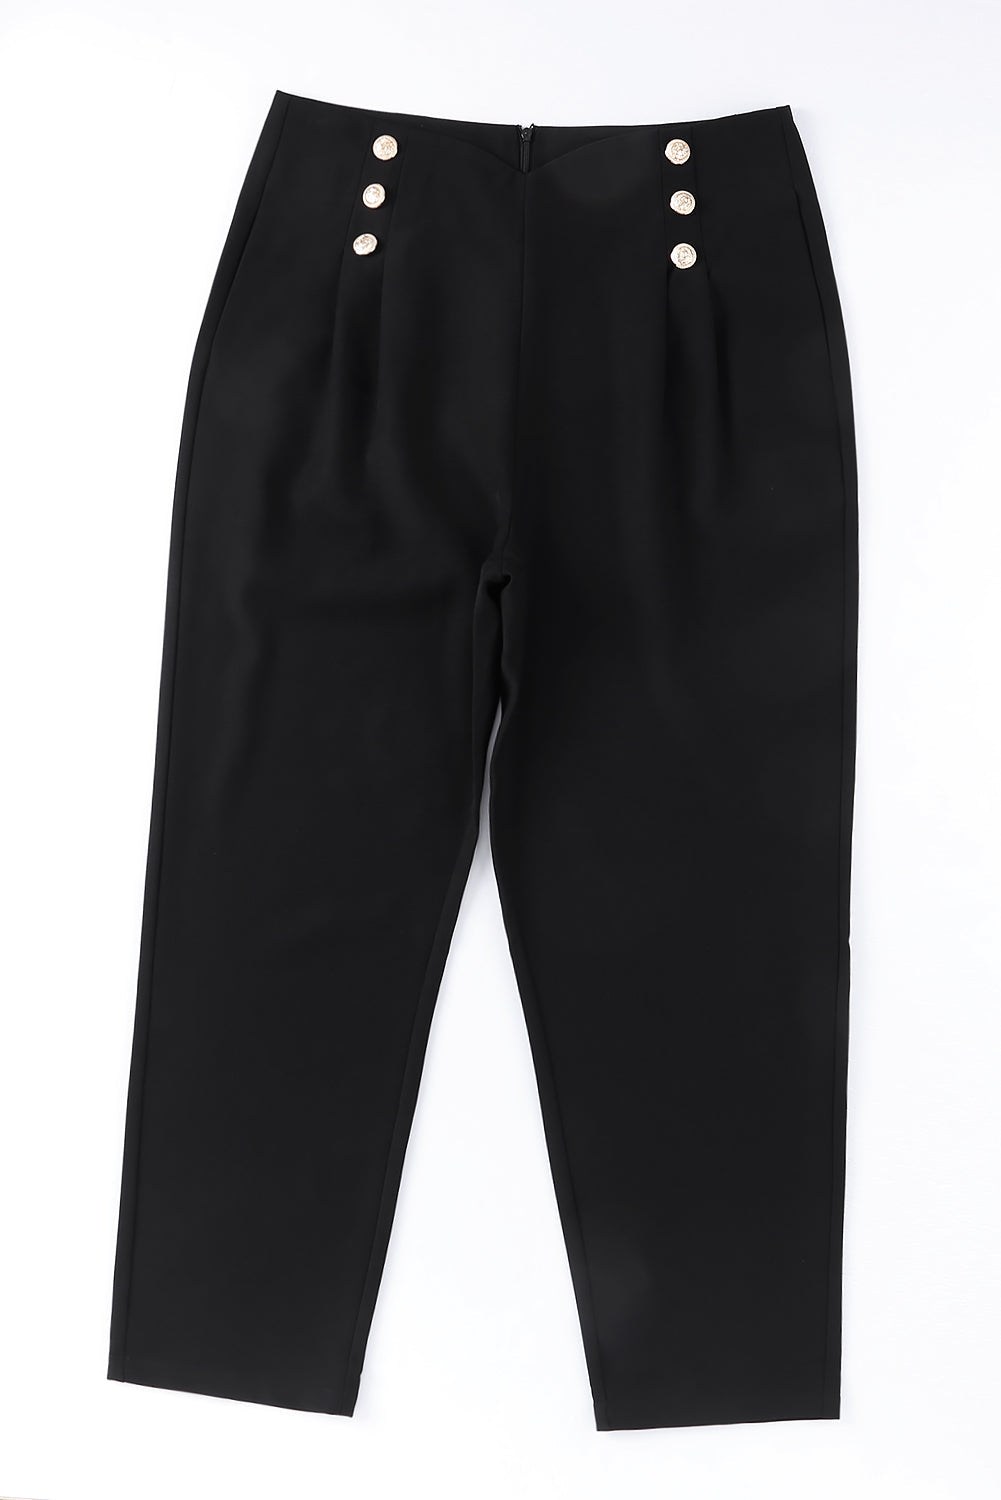 Black Double Breasted Pleated Casual Cropped Pants